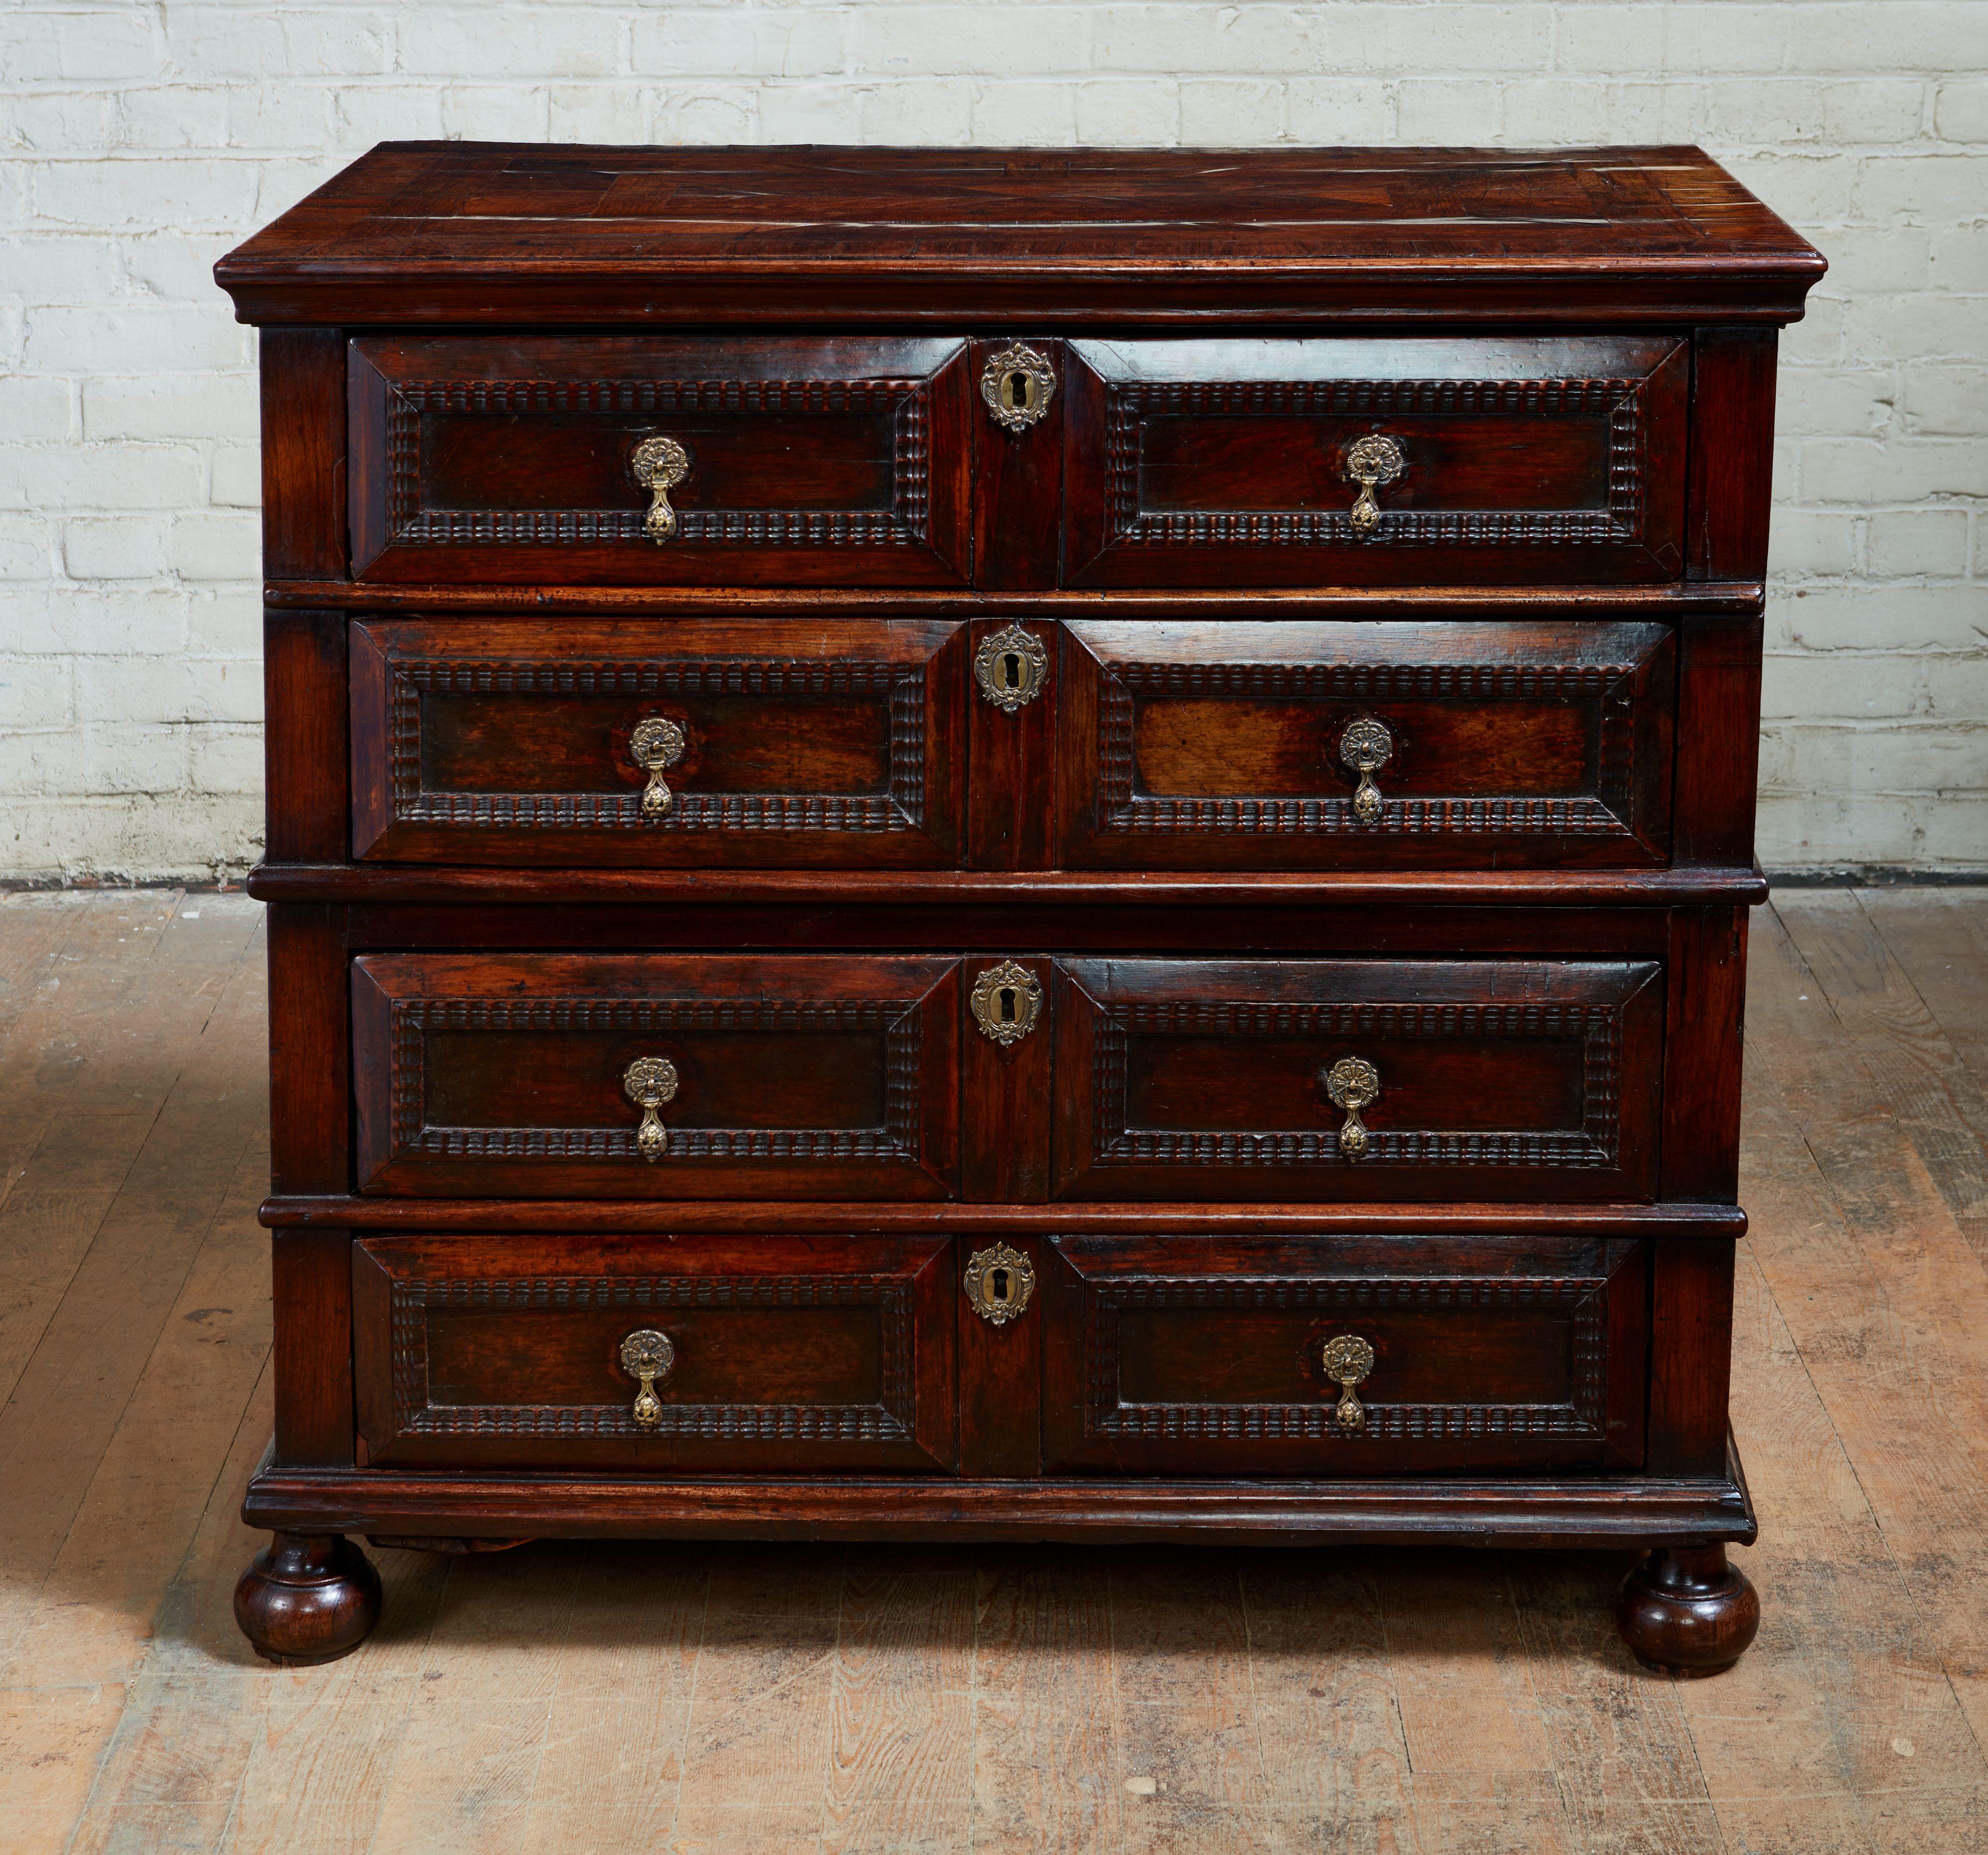 Fine and rare late 17th century English chest of drawers entirely veneered in kingwood, the parquetry top over cushion molded drawers having tear drop pulls, the carcass made in two sections having molded seam and standing on original bun feet, the